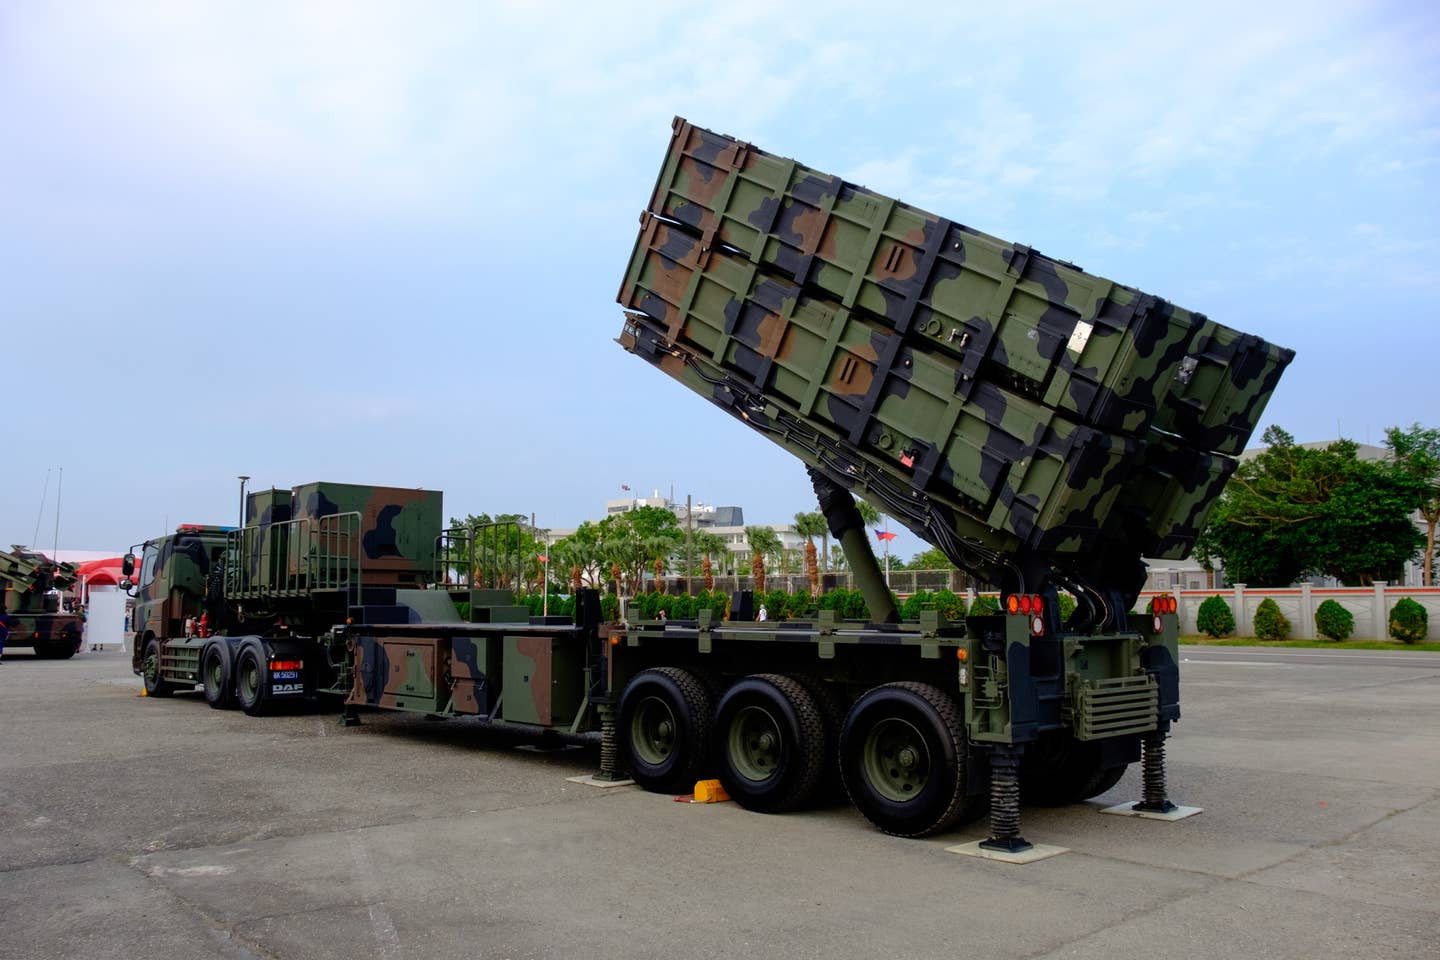 message-editor%2F1603821311793-rocn_hsiung_feng_ii__hsiung_feng_iii_anti-ship_missile_launchers_trailer_and_truck_display_at_zuoying_naval_base_ground_left_rear_view_20161112.jpg